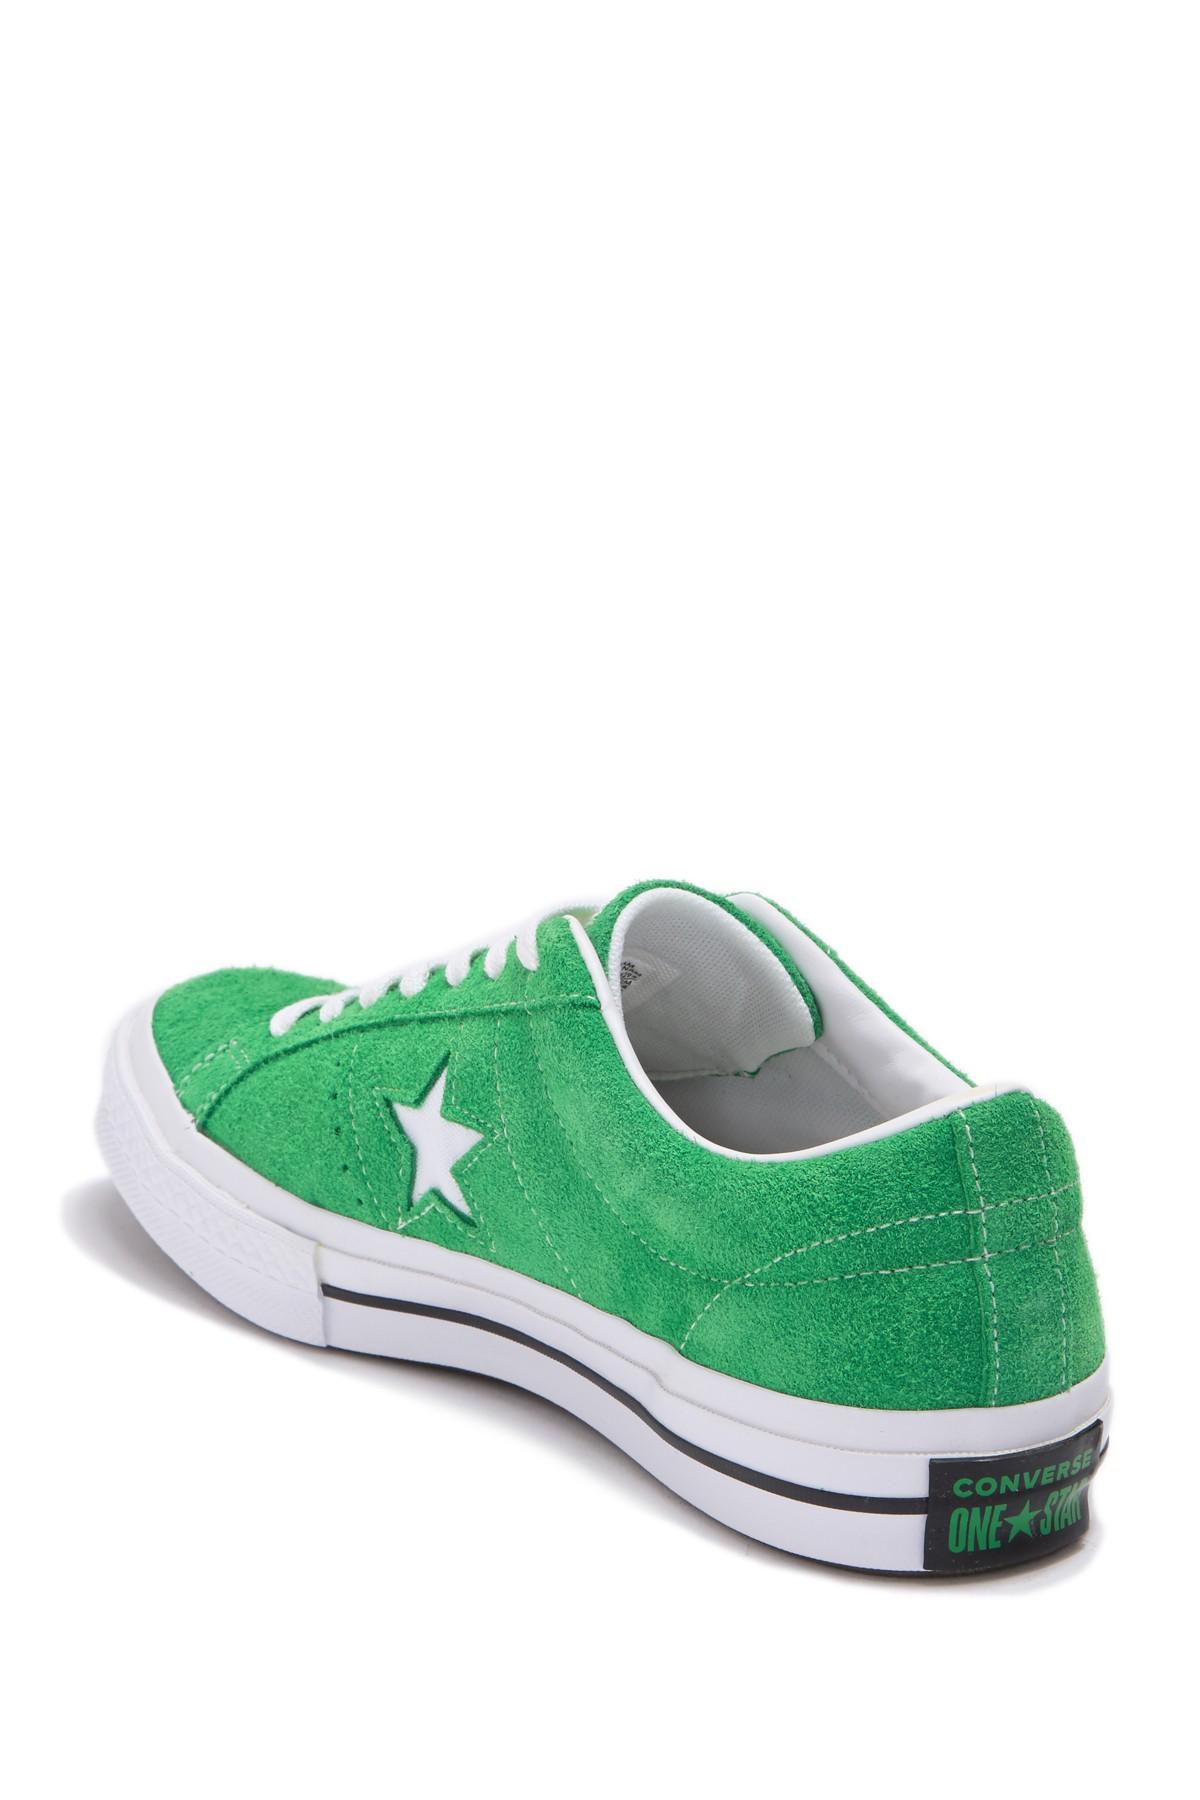 Converse One Star Suede Green Star Sneaker (unisex) for Men | Lyst